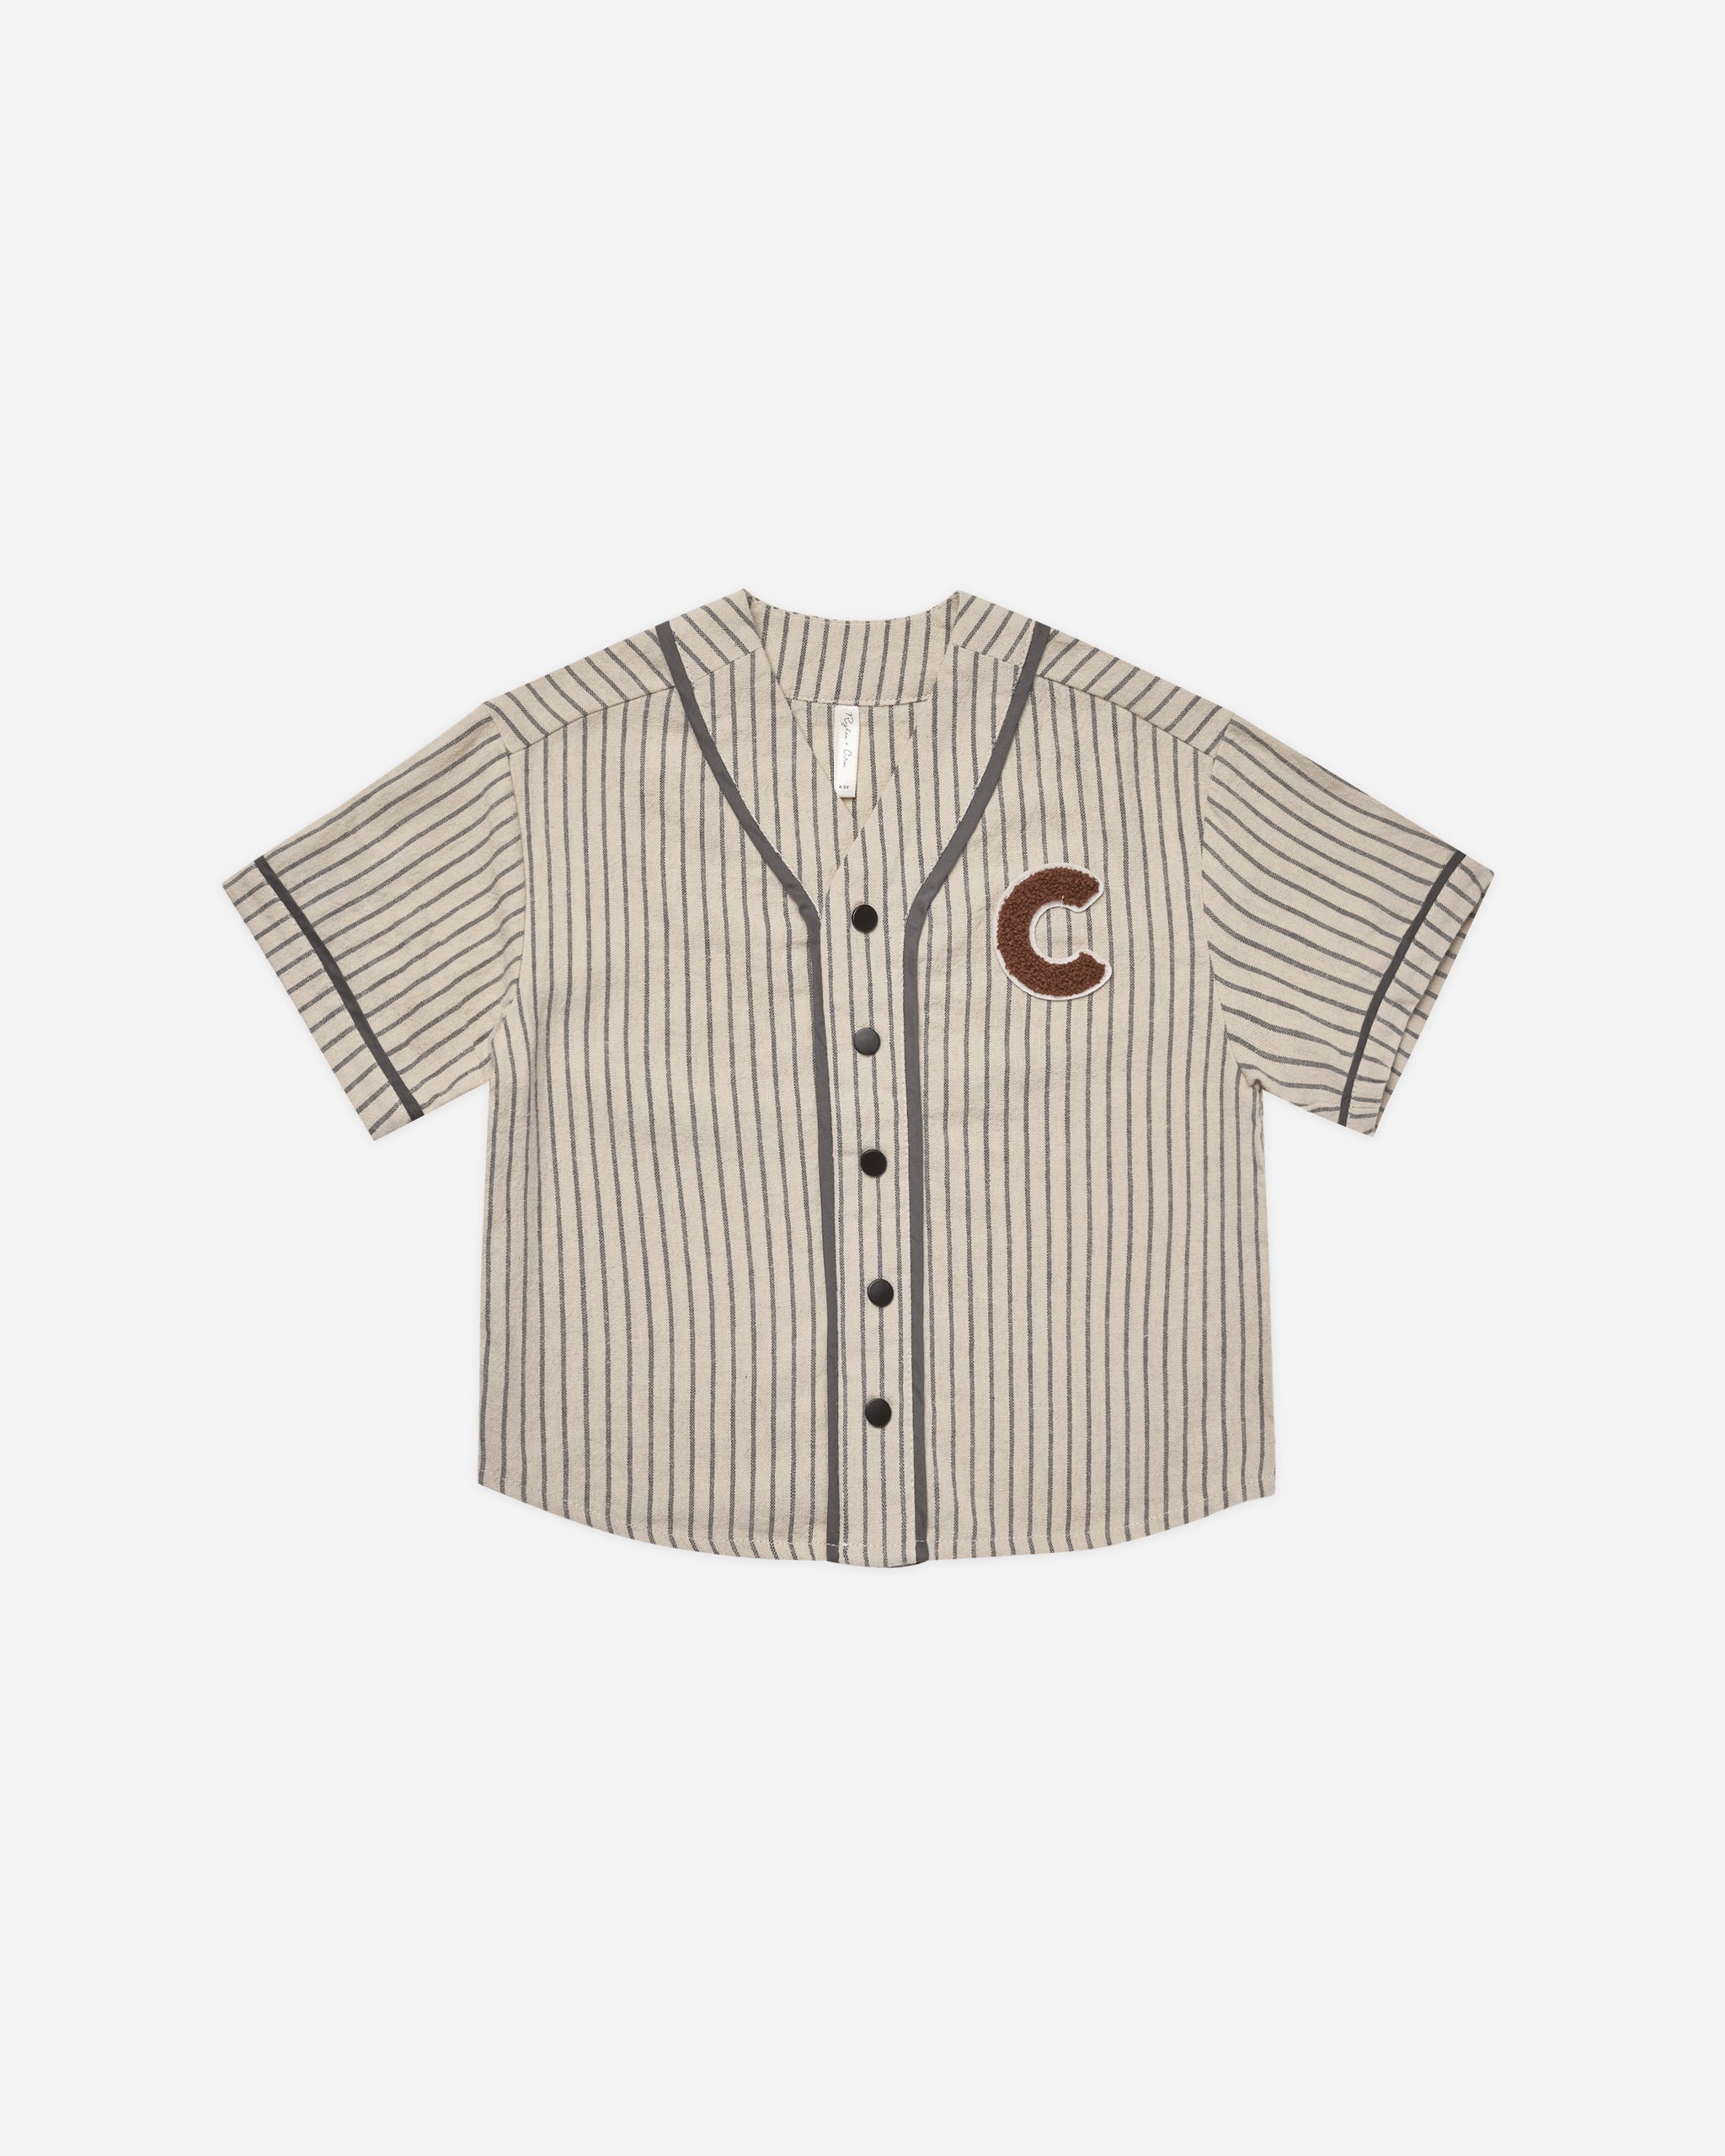 Baseball Shirt || Slate Pinstripe - Rylee + Cru | Kids Clothes | Trendy Baby Clothes | Modern Infant Outfits |